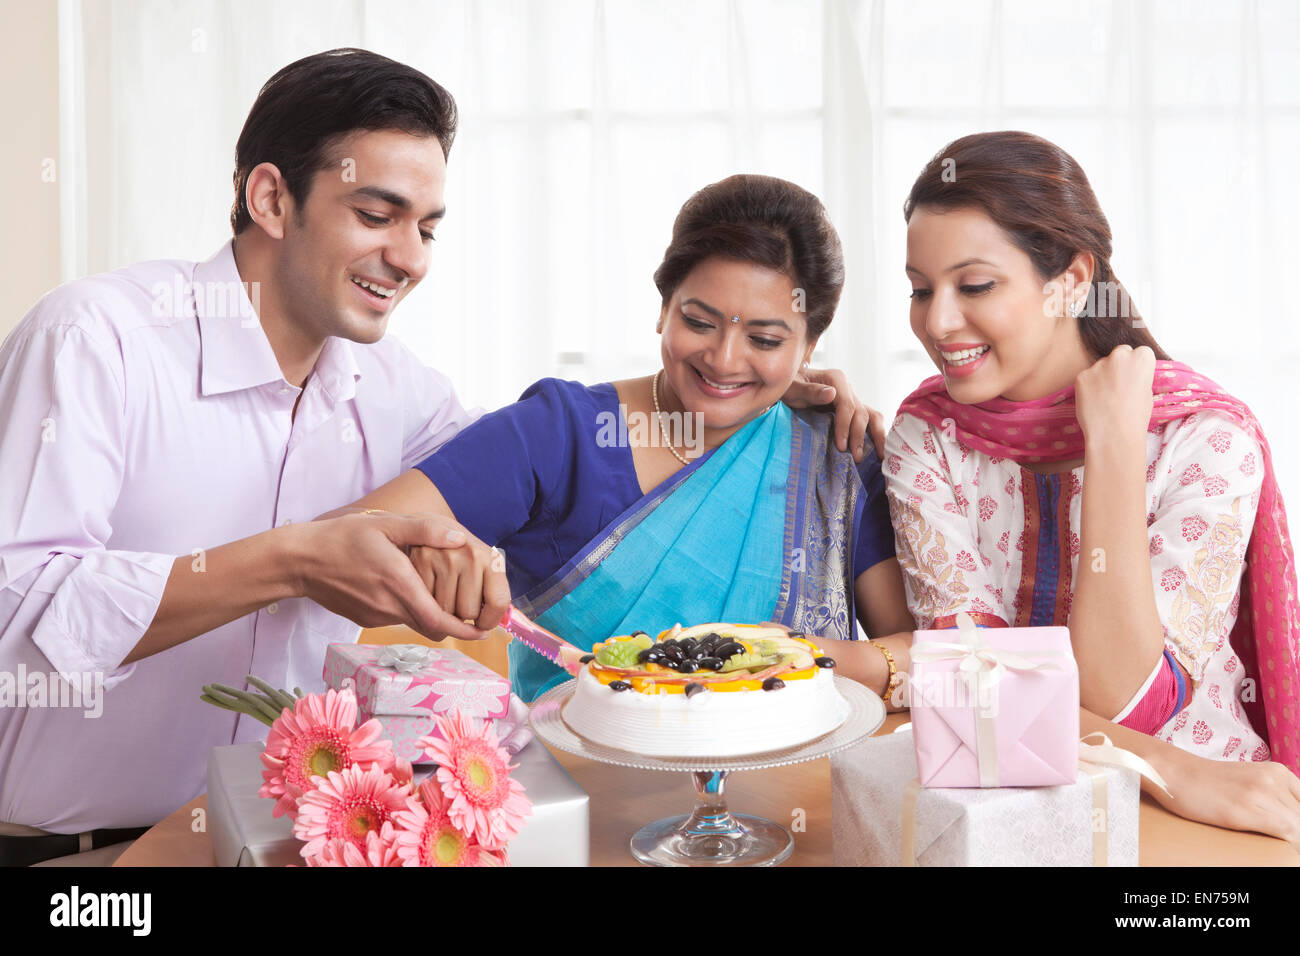 Woman cutting birthday cake with a knife Stock Photo